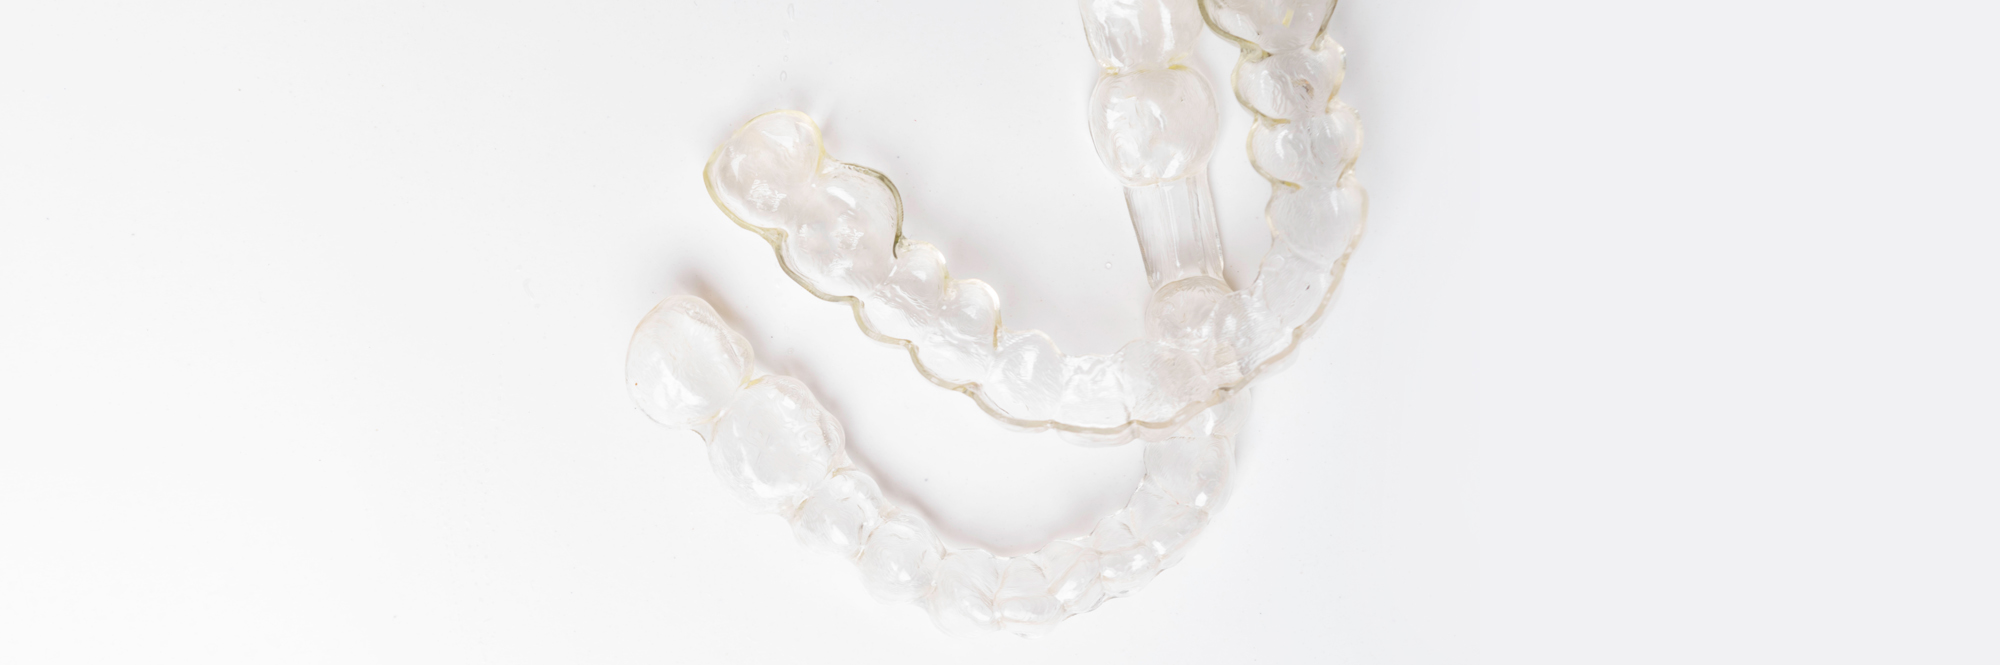 The Ins and Outs of Invisalign